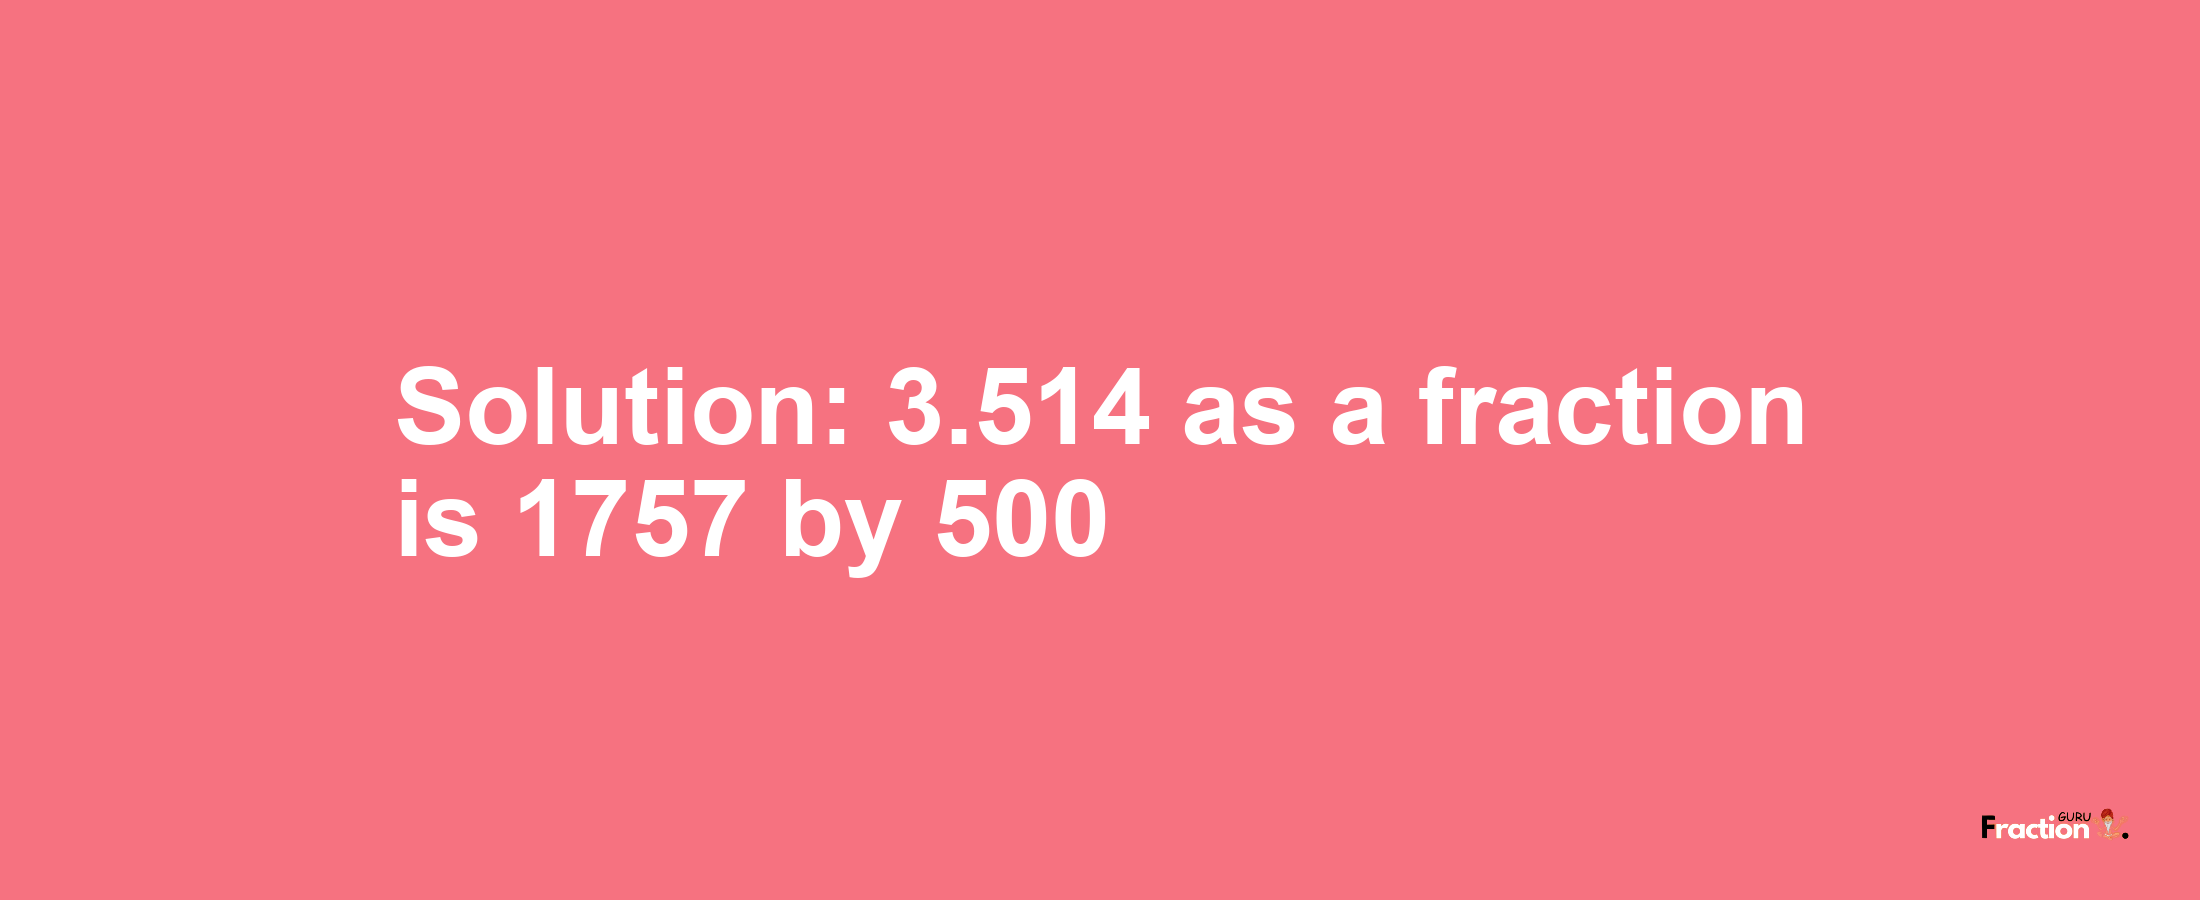 Solution:3.514 as a fraction is 1757/500